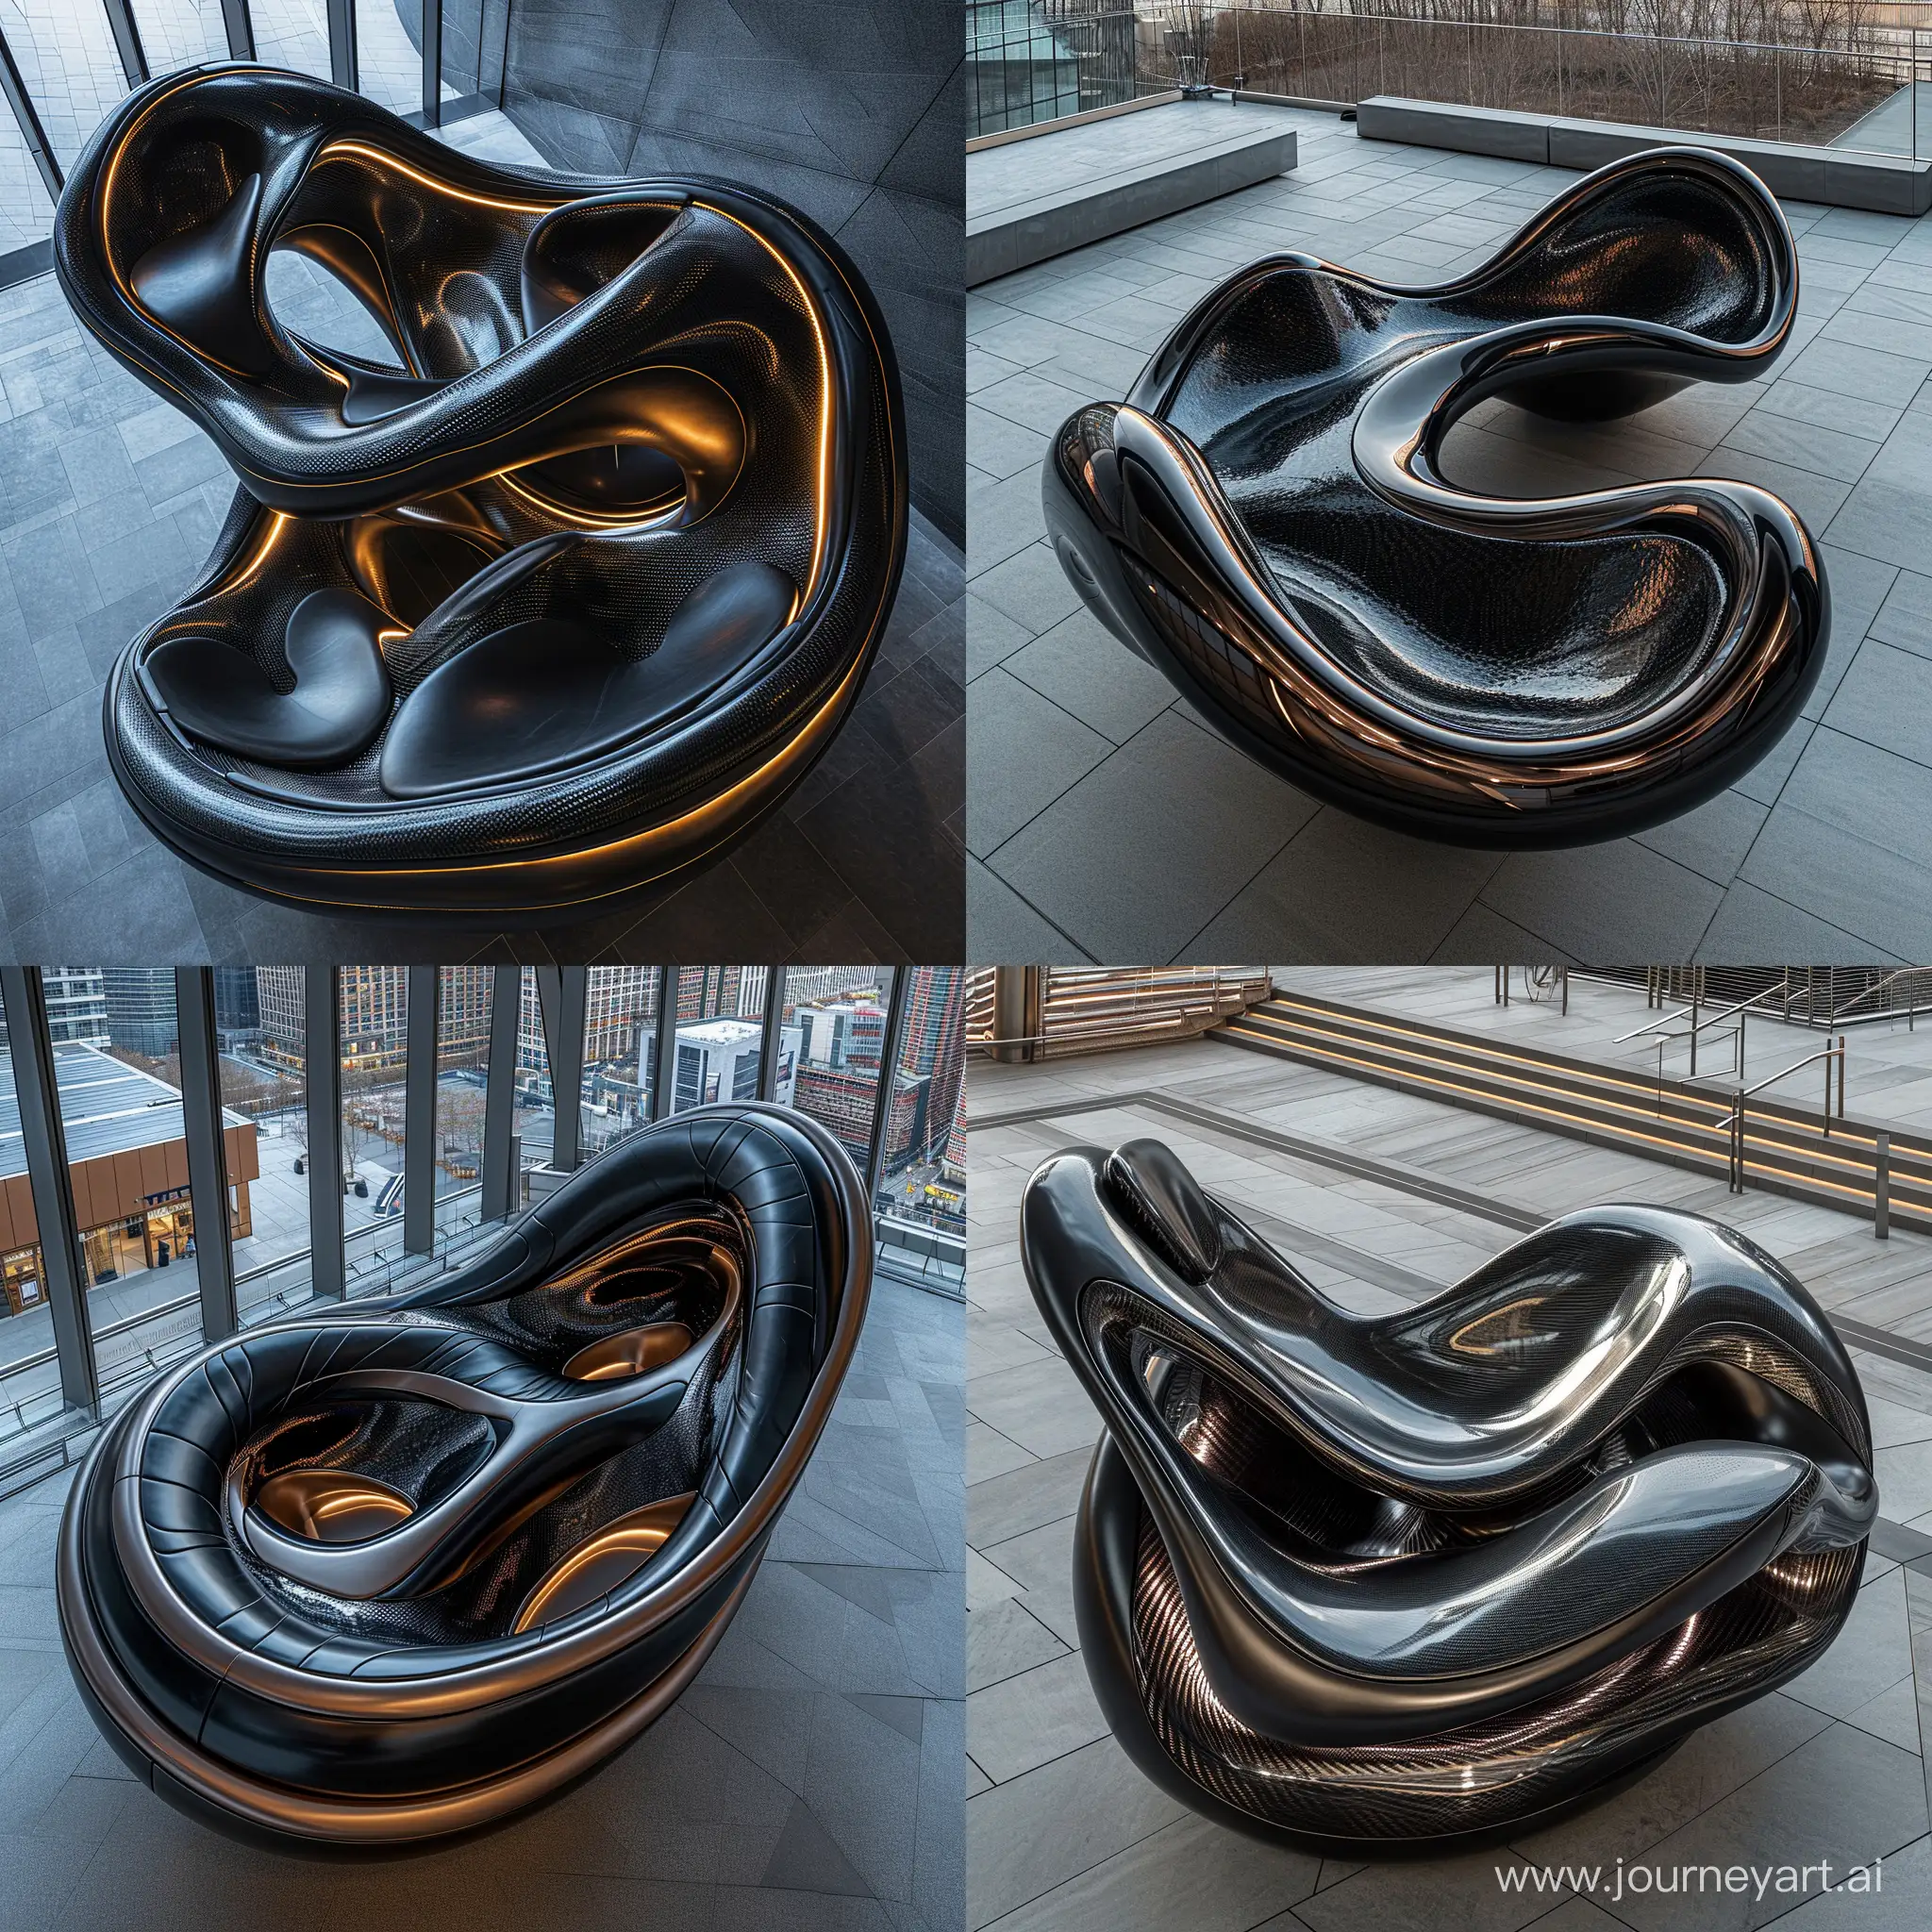  The Vessel urban viewpoint,location Hudson Yards ,aerial view, fluid and curved forms, black and metallic leather, sensation of movement, dynamism, carbon fiber, futuristic sensation, modern, integration of technology, modular design, set of LED lights, ergonomics, attractive, eye -Catching, abstract shapes, curved, sculptural, organic shapes in the style of the movie Blade Runner panorama